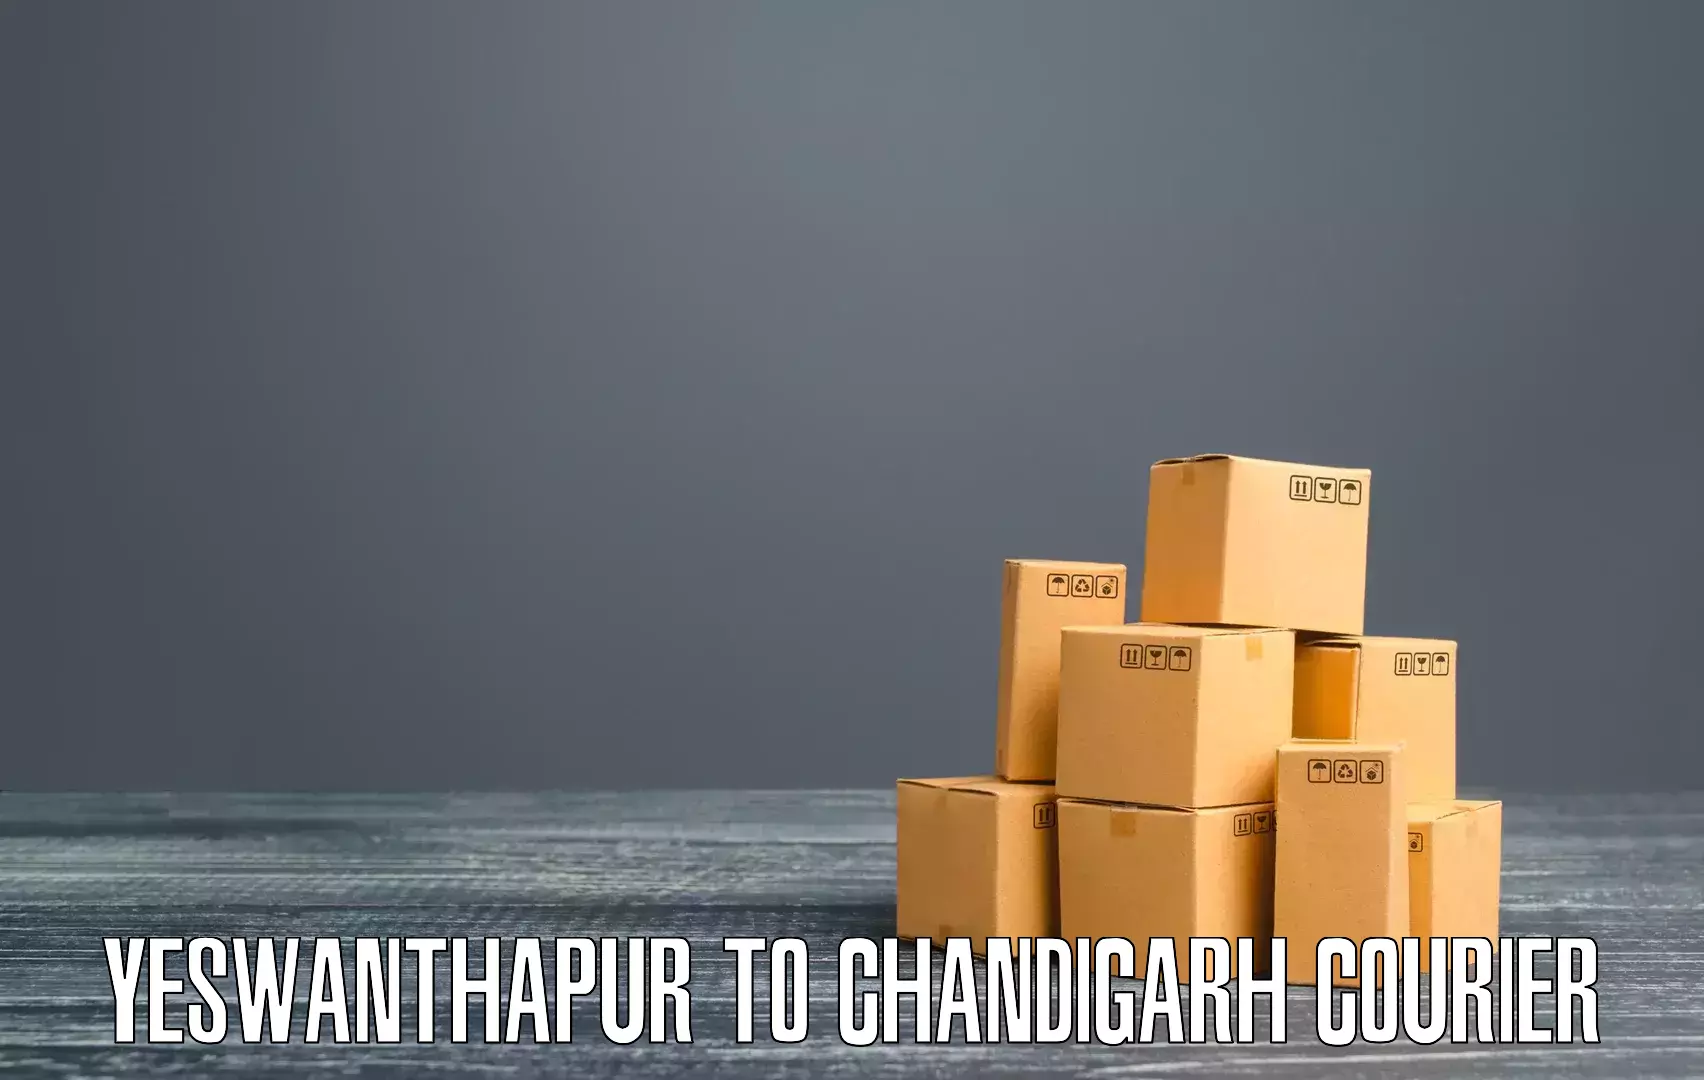 Modern delivery technologies Yeswanthapur to Chandigarh